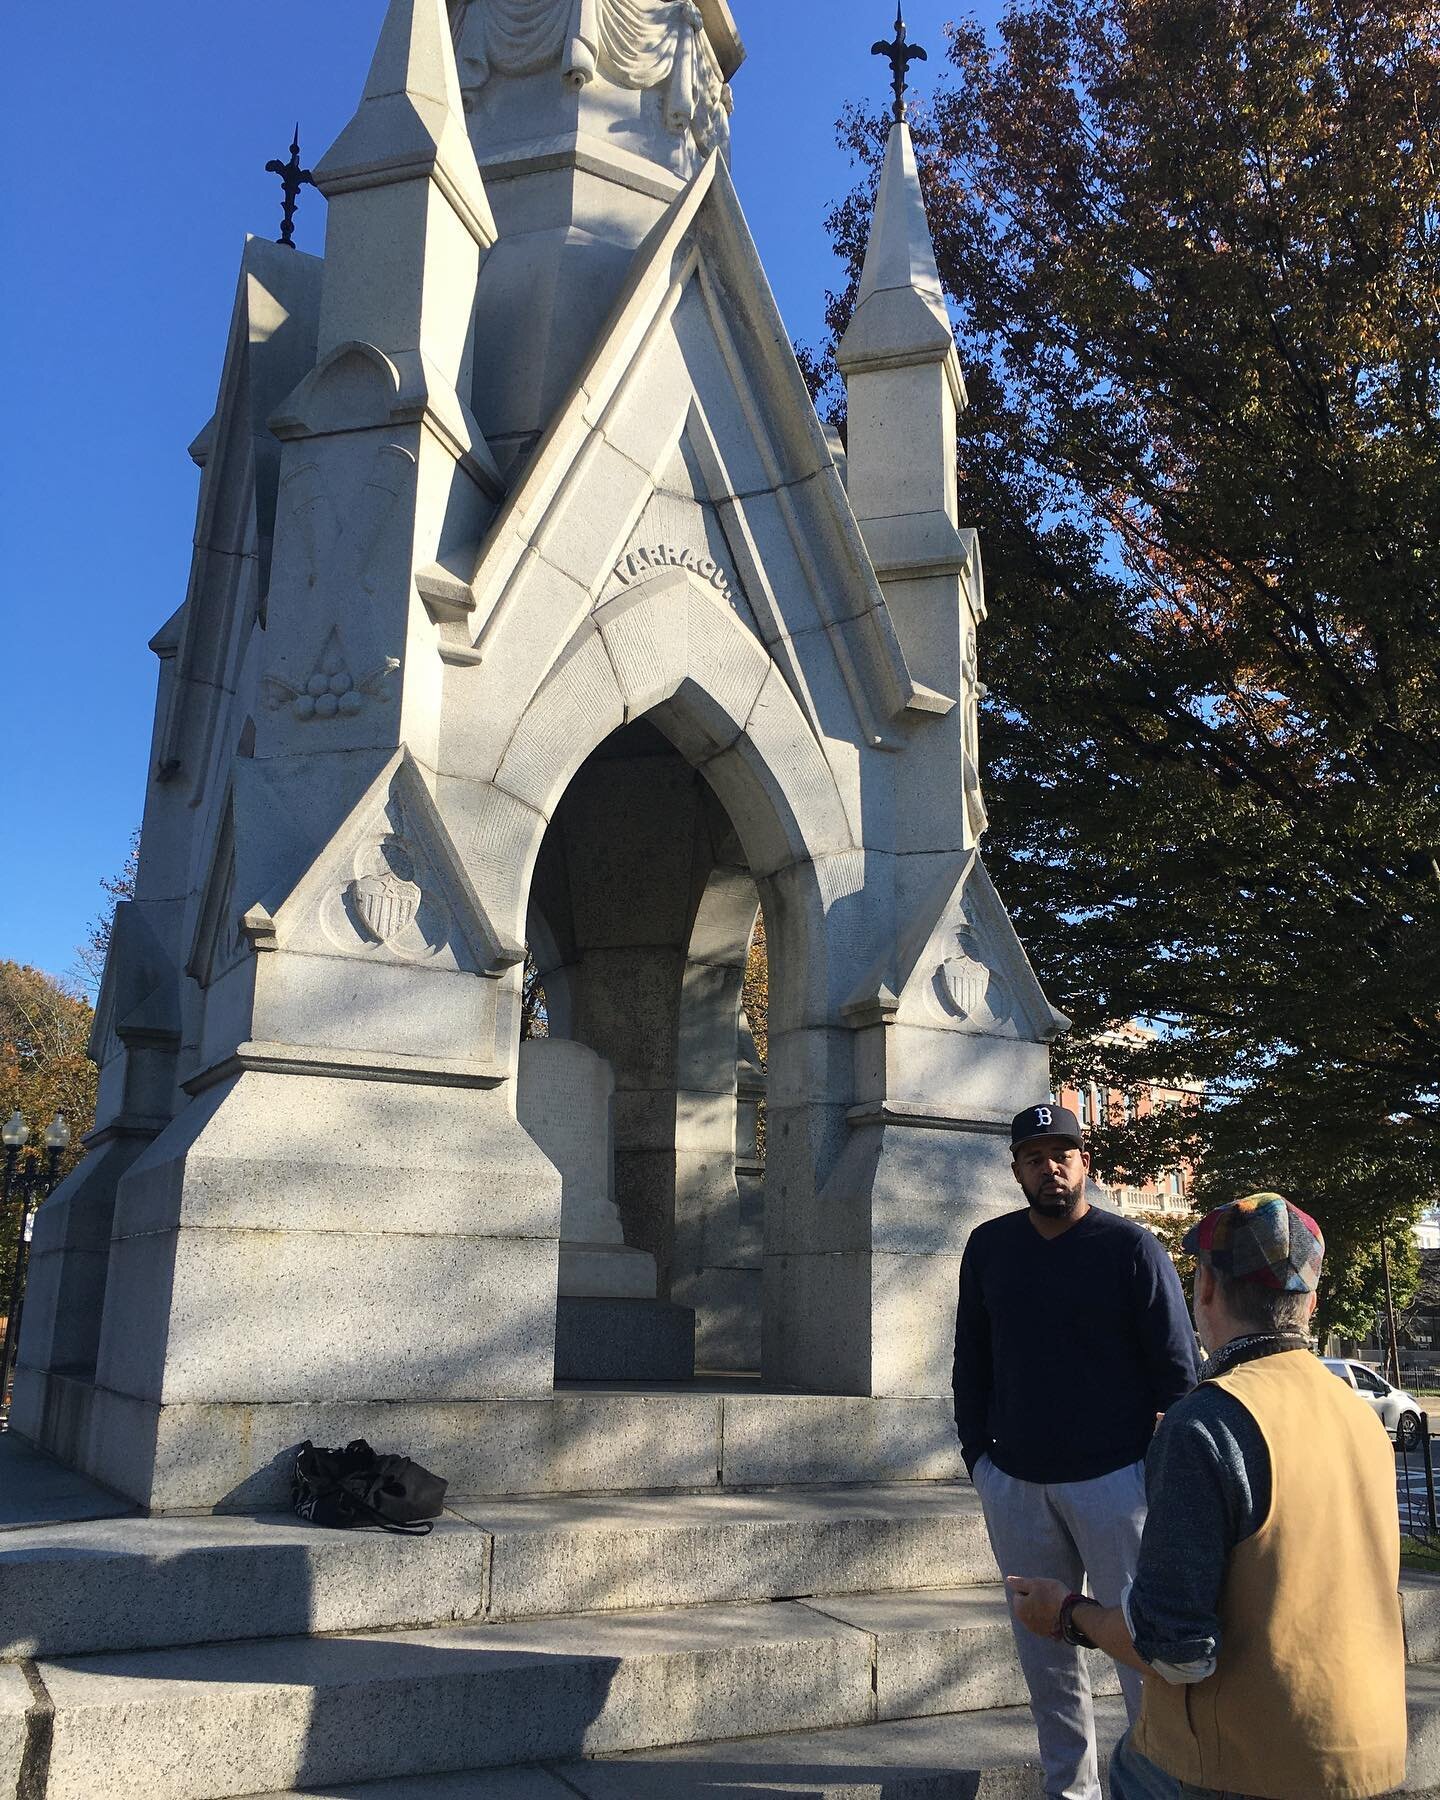 A few weeks ago Matthew and I met with Corey Stallings, the Director of South Street Yourh Center. 

Corey shared, &ldquo;I have never been inside the Soldier&rsquo;s Monument. In fact, I barely paid attention to it. Does anyone see this space for th